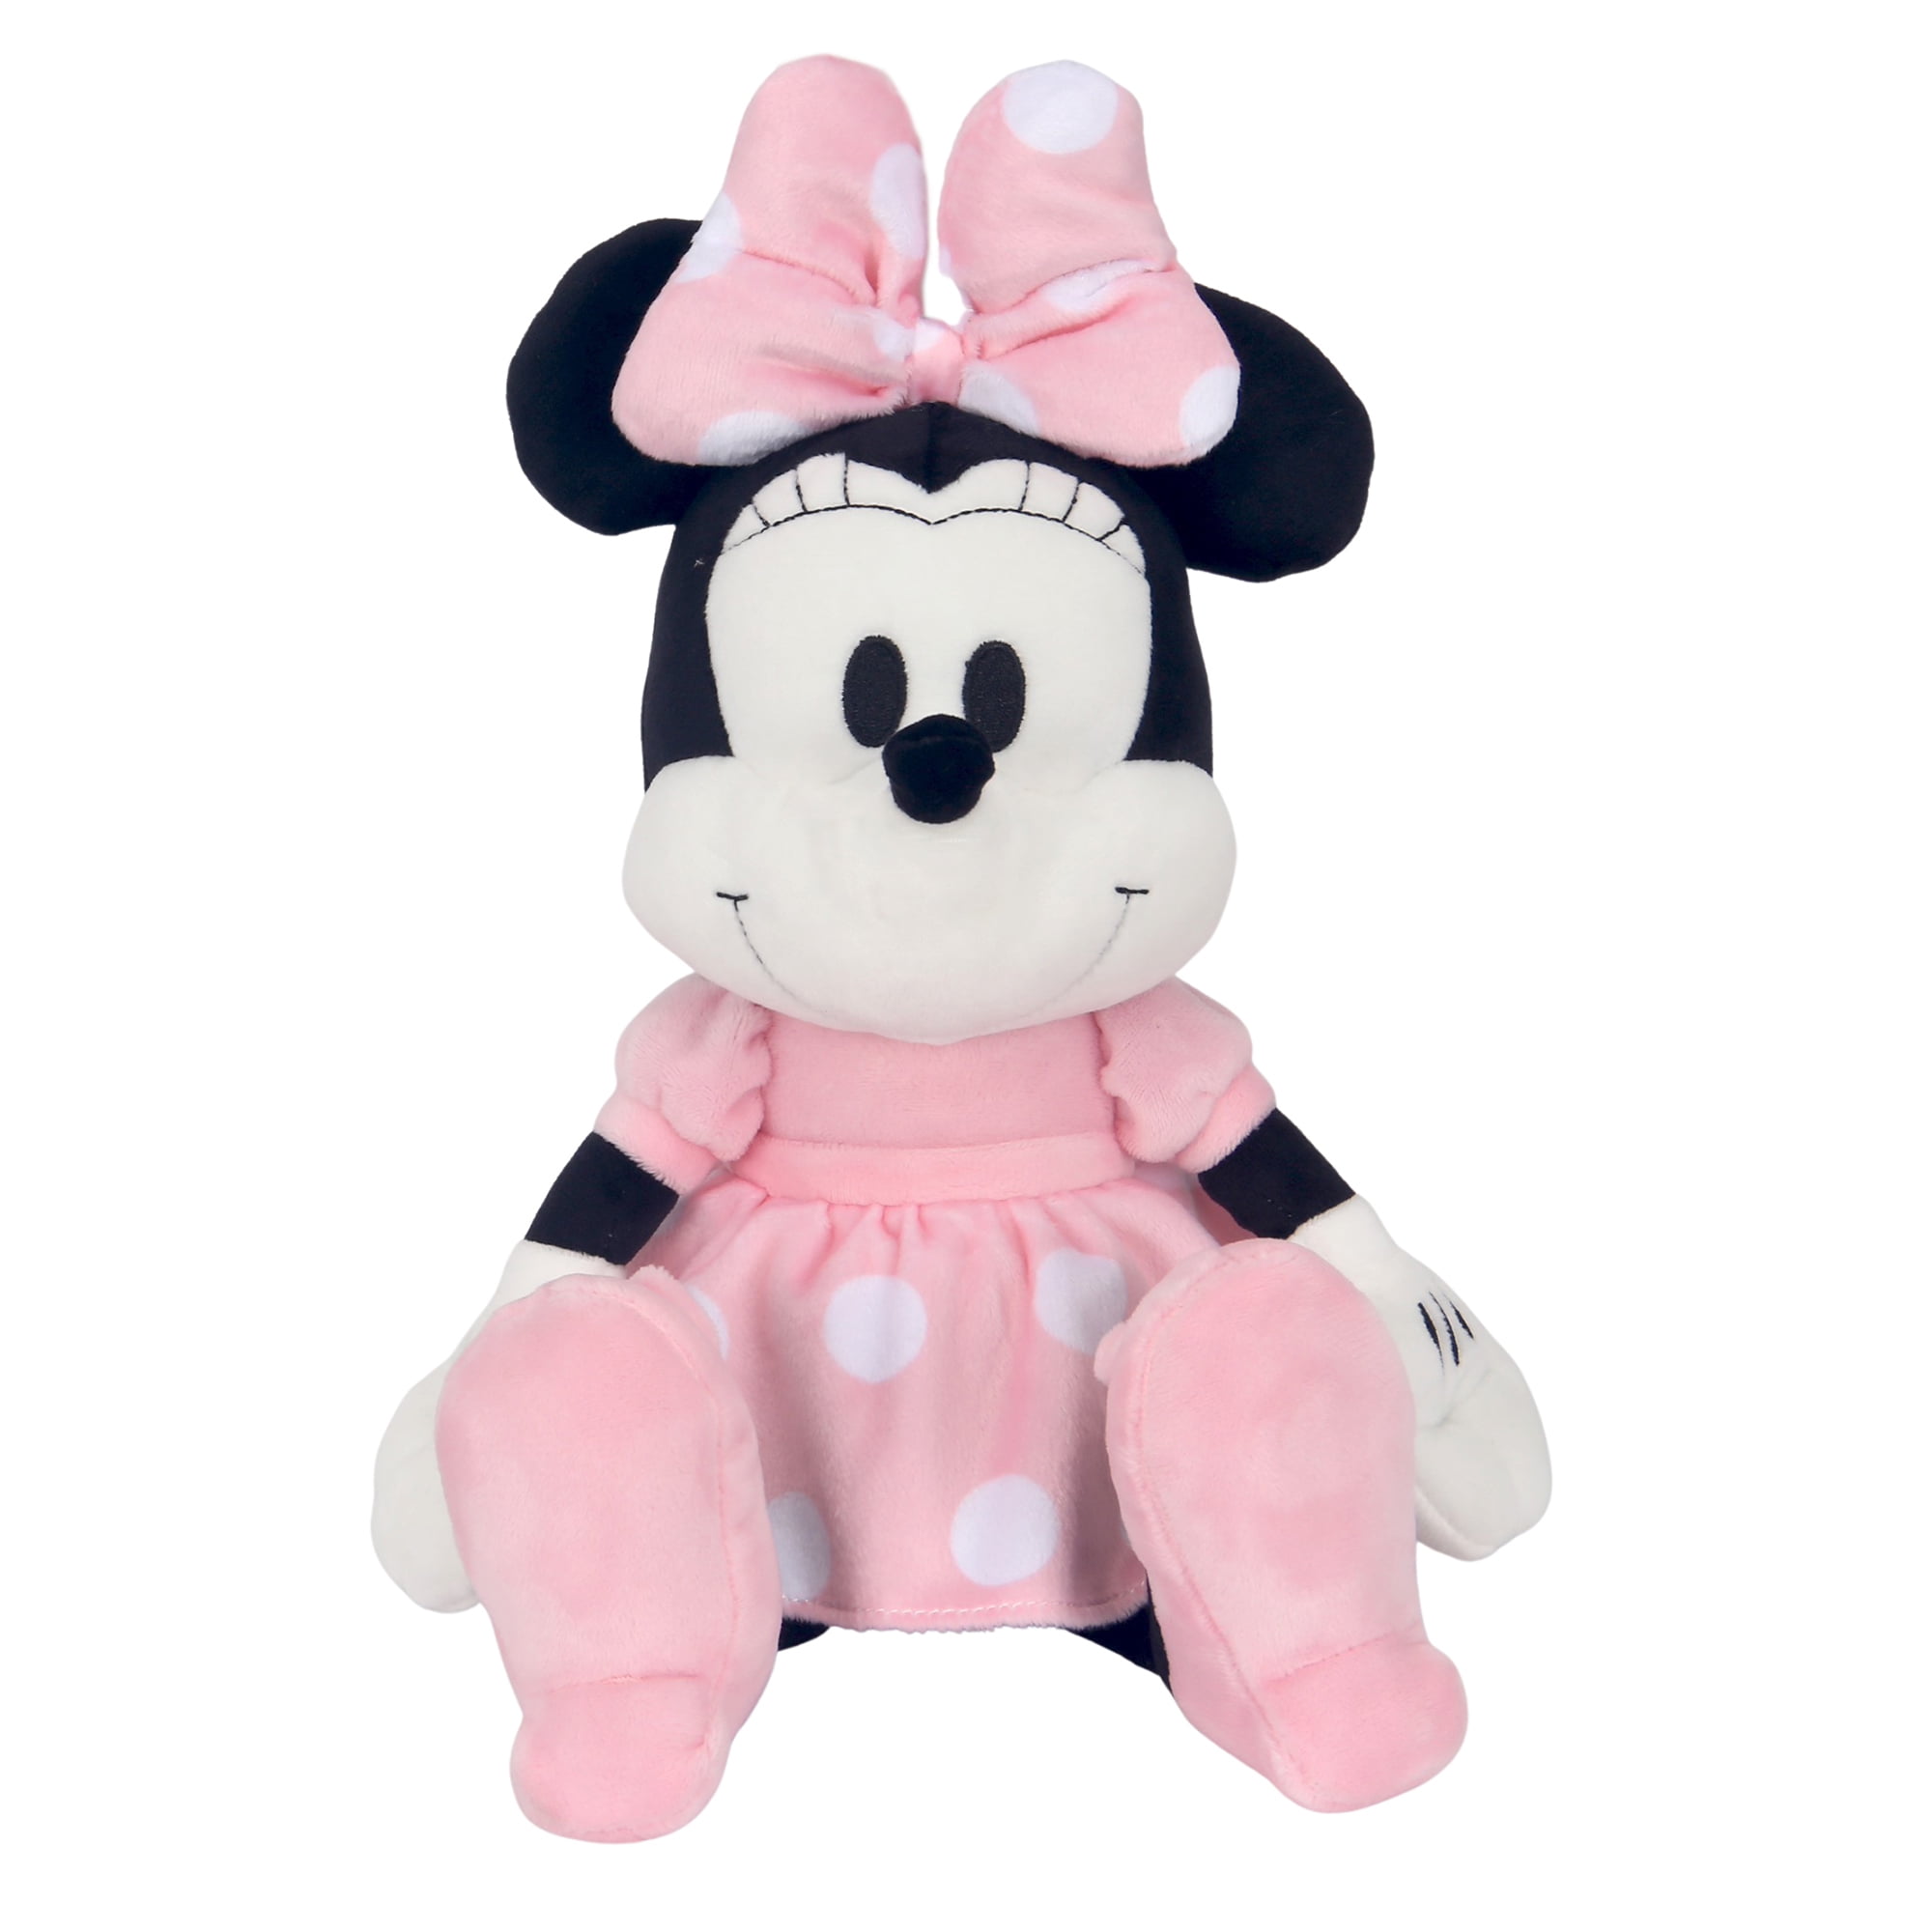 Lambs & Ivy Disney Baby Mickey Mouse Plush Stuffed Animal Toy Black/white for sale online 